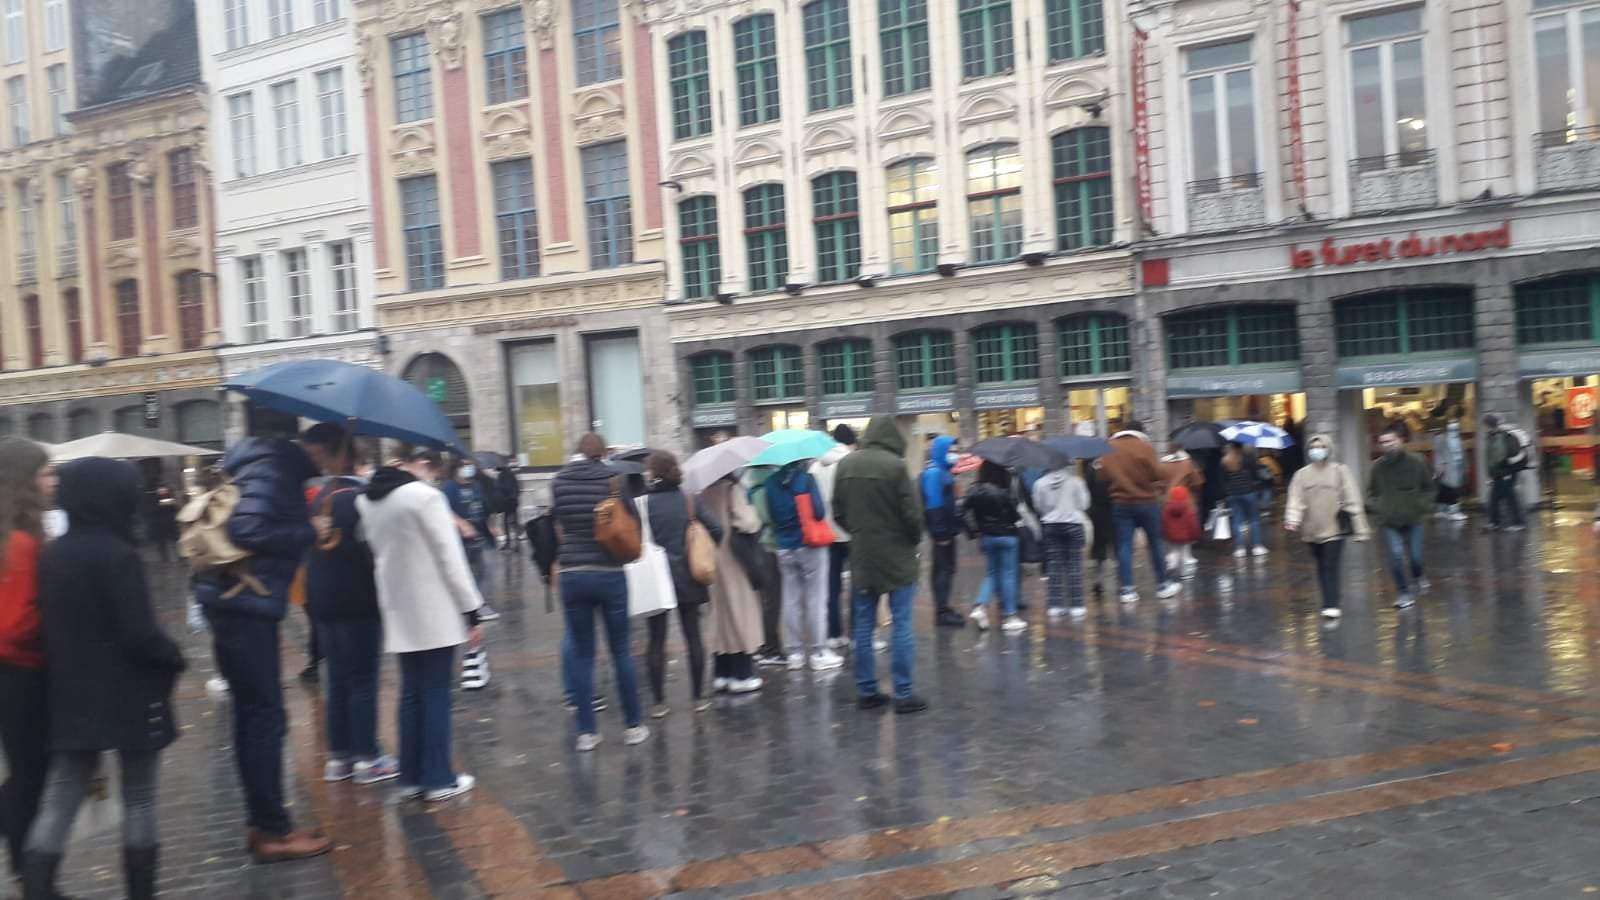 France, queues in front of bookstores before they close for lockdown. Photo goes viral